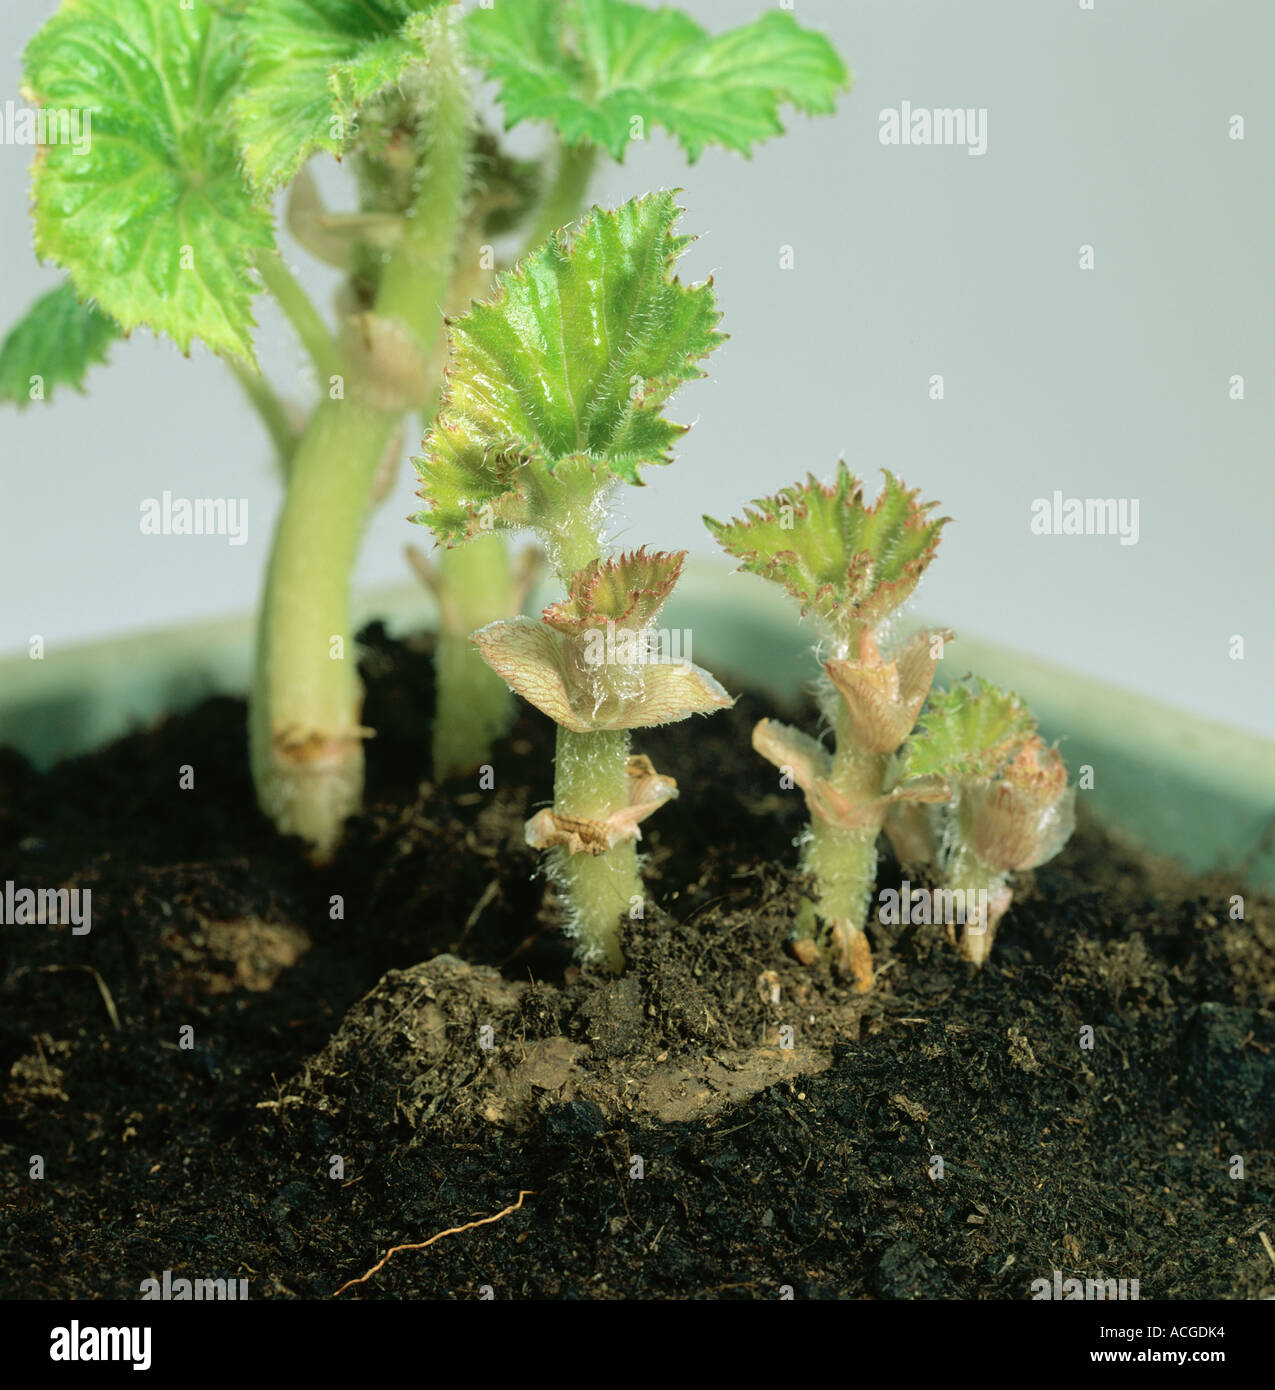 Leaves sprouting from overwintered Begonia x tuberhybrida tubers Stock Photo